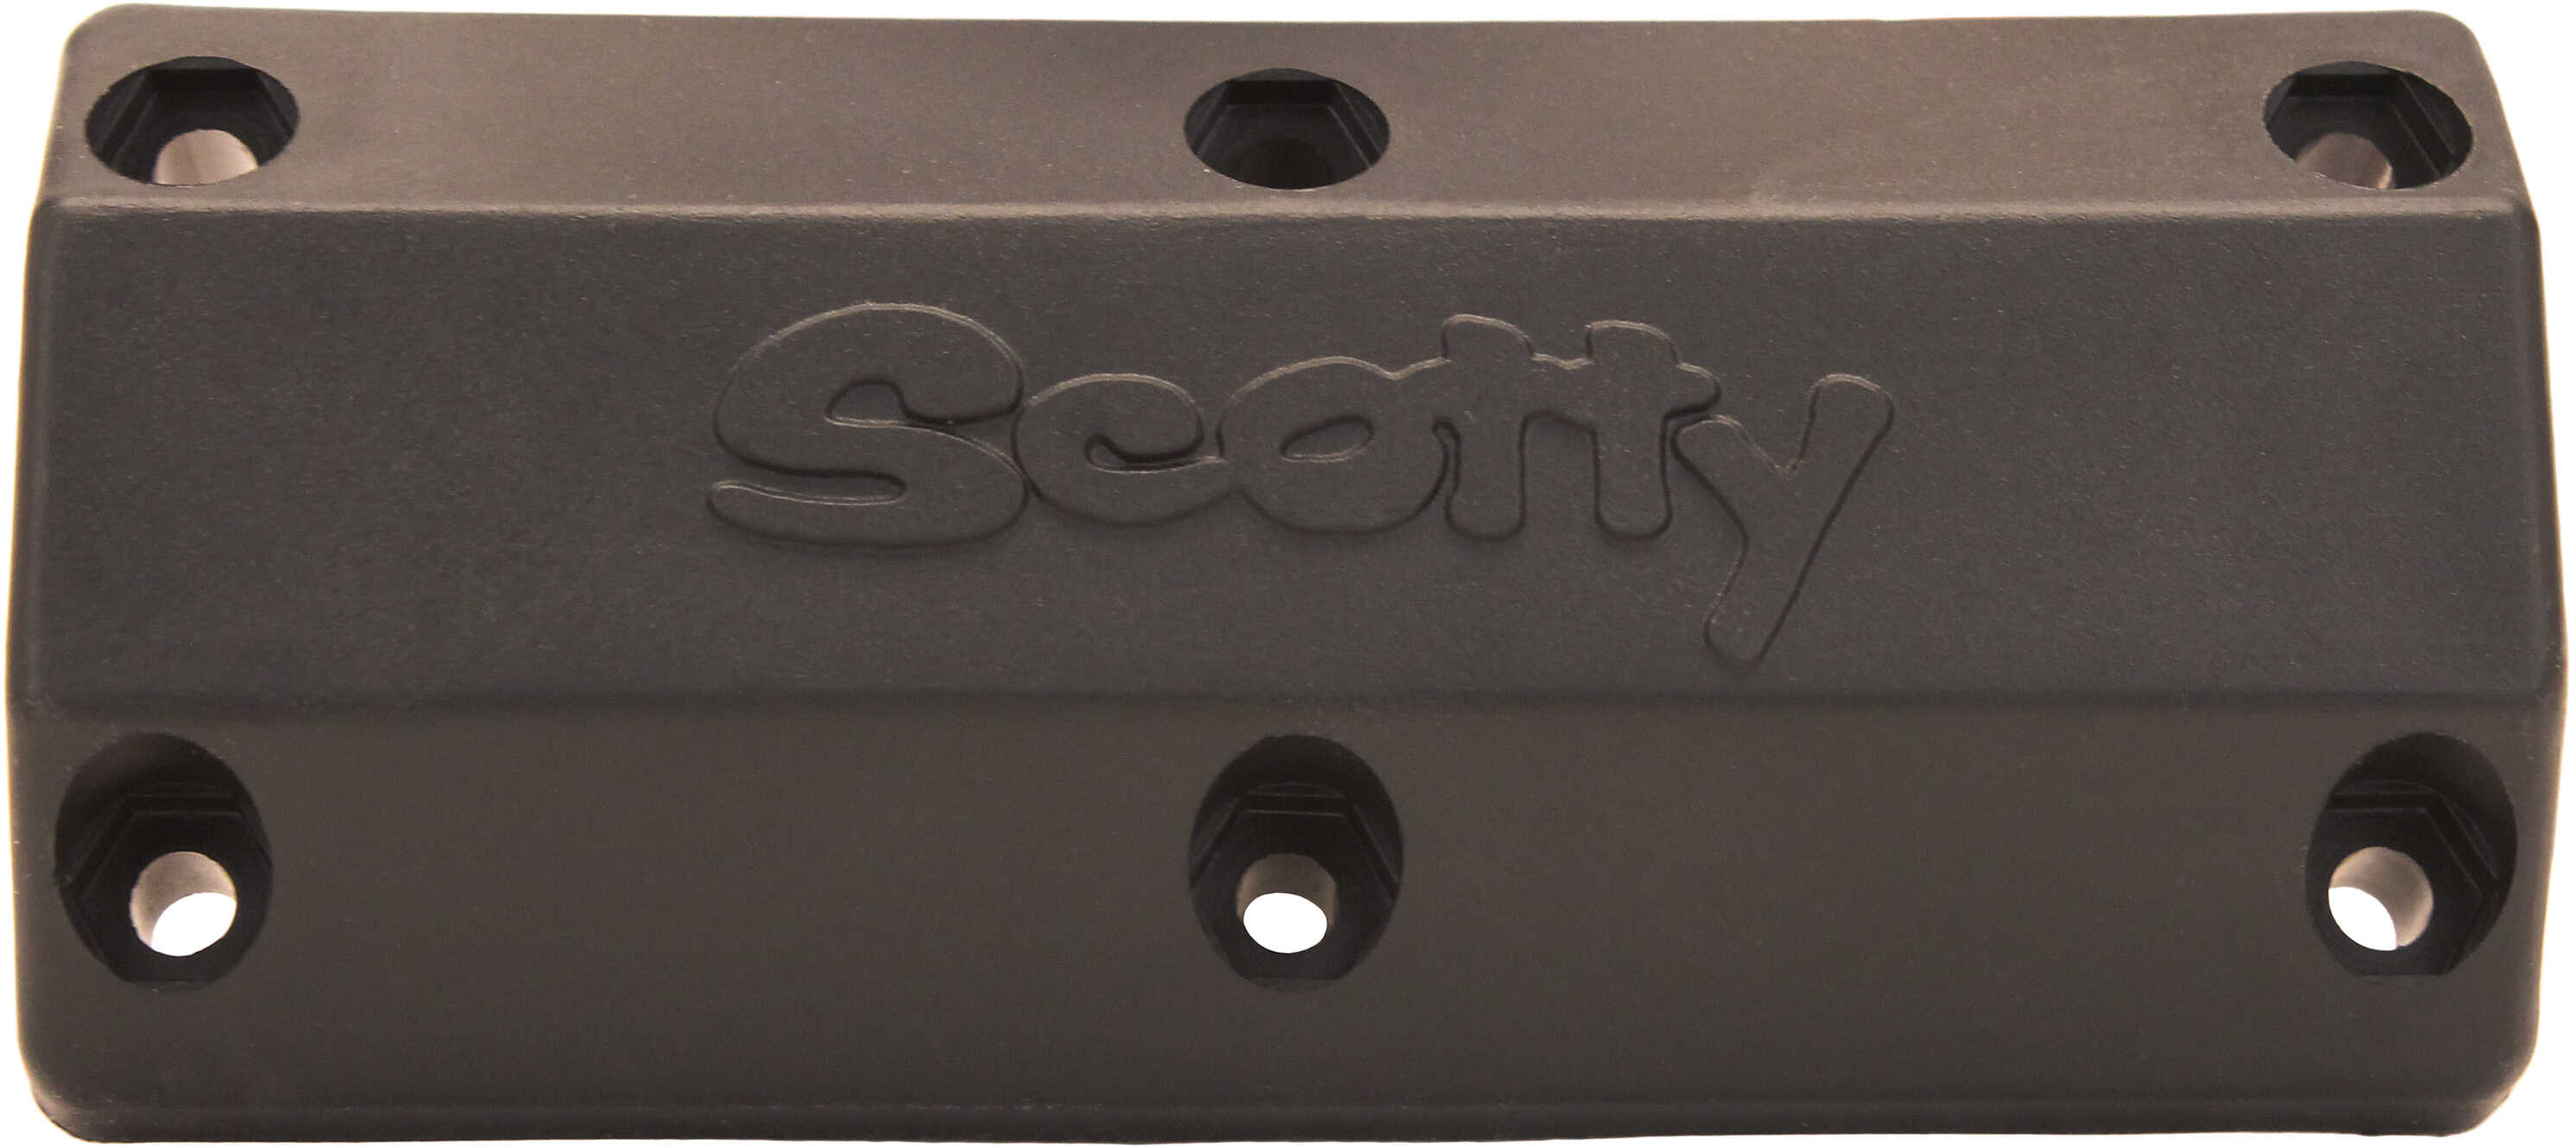 Scotty Rail Mounting Adapter for 0222 and 0224 Md: 0238